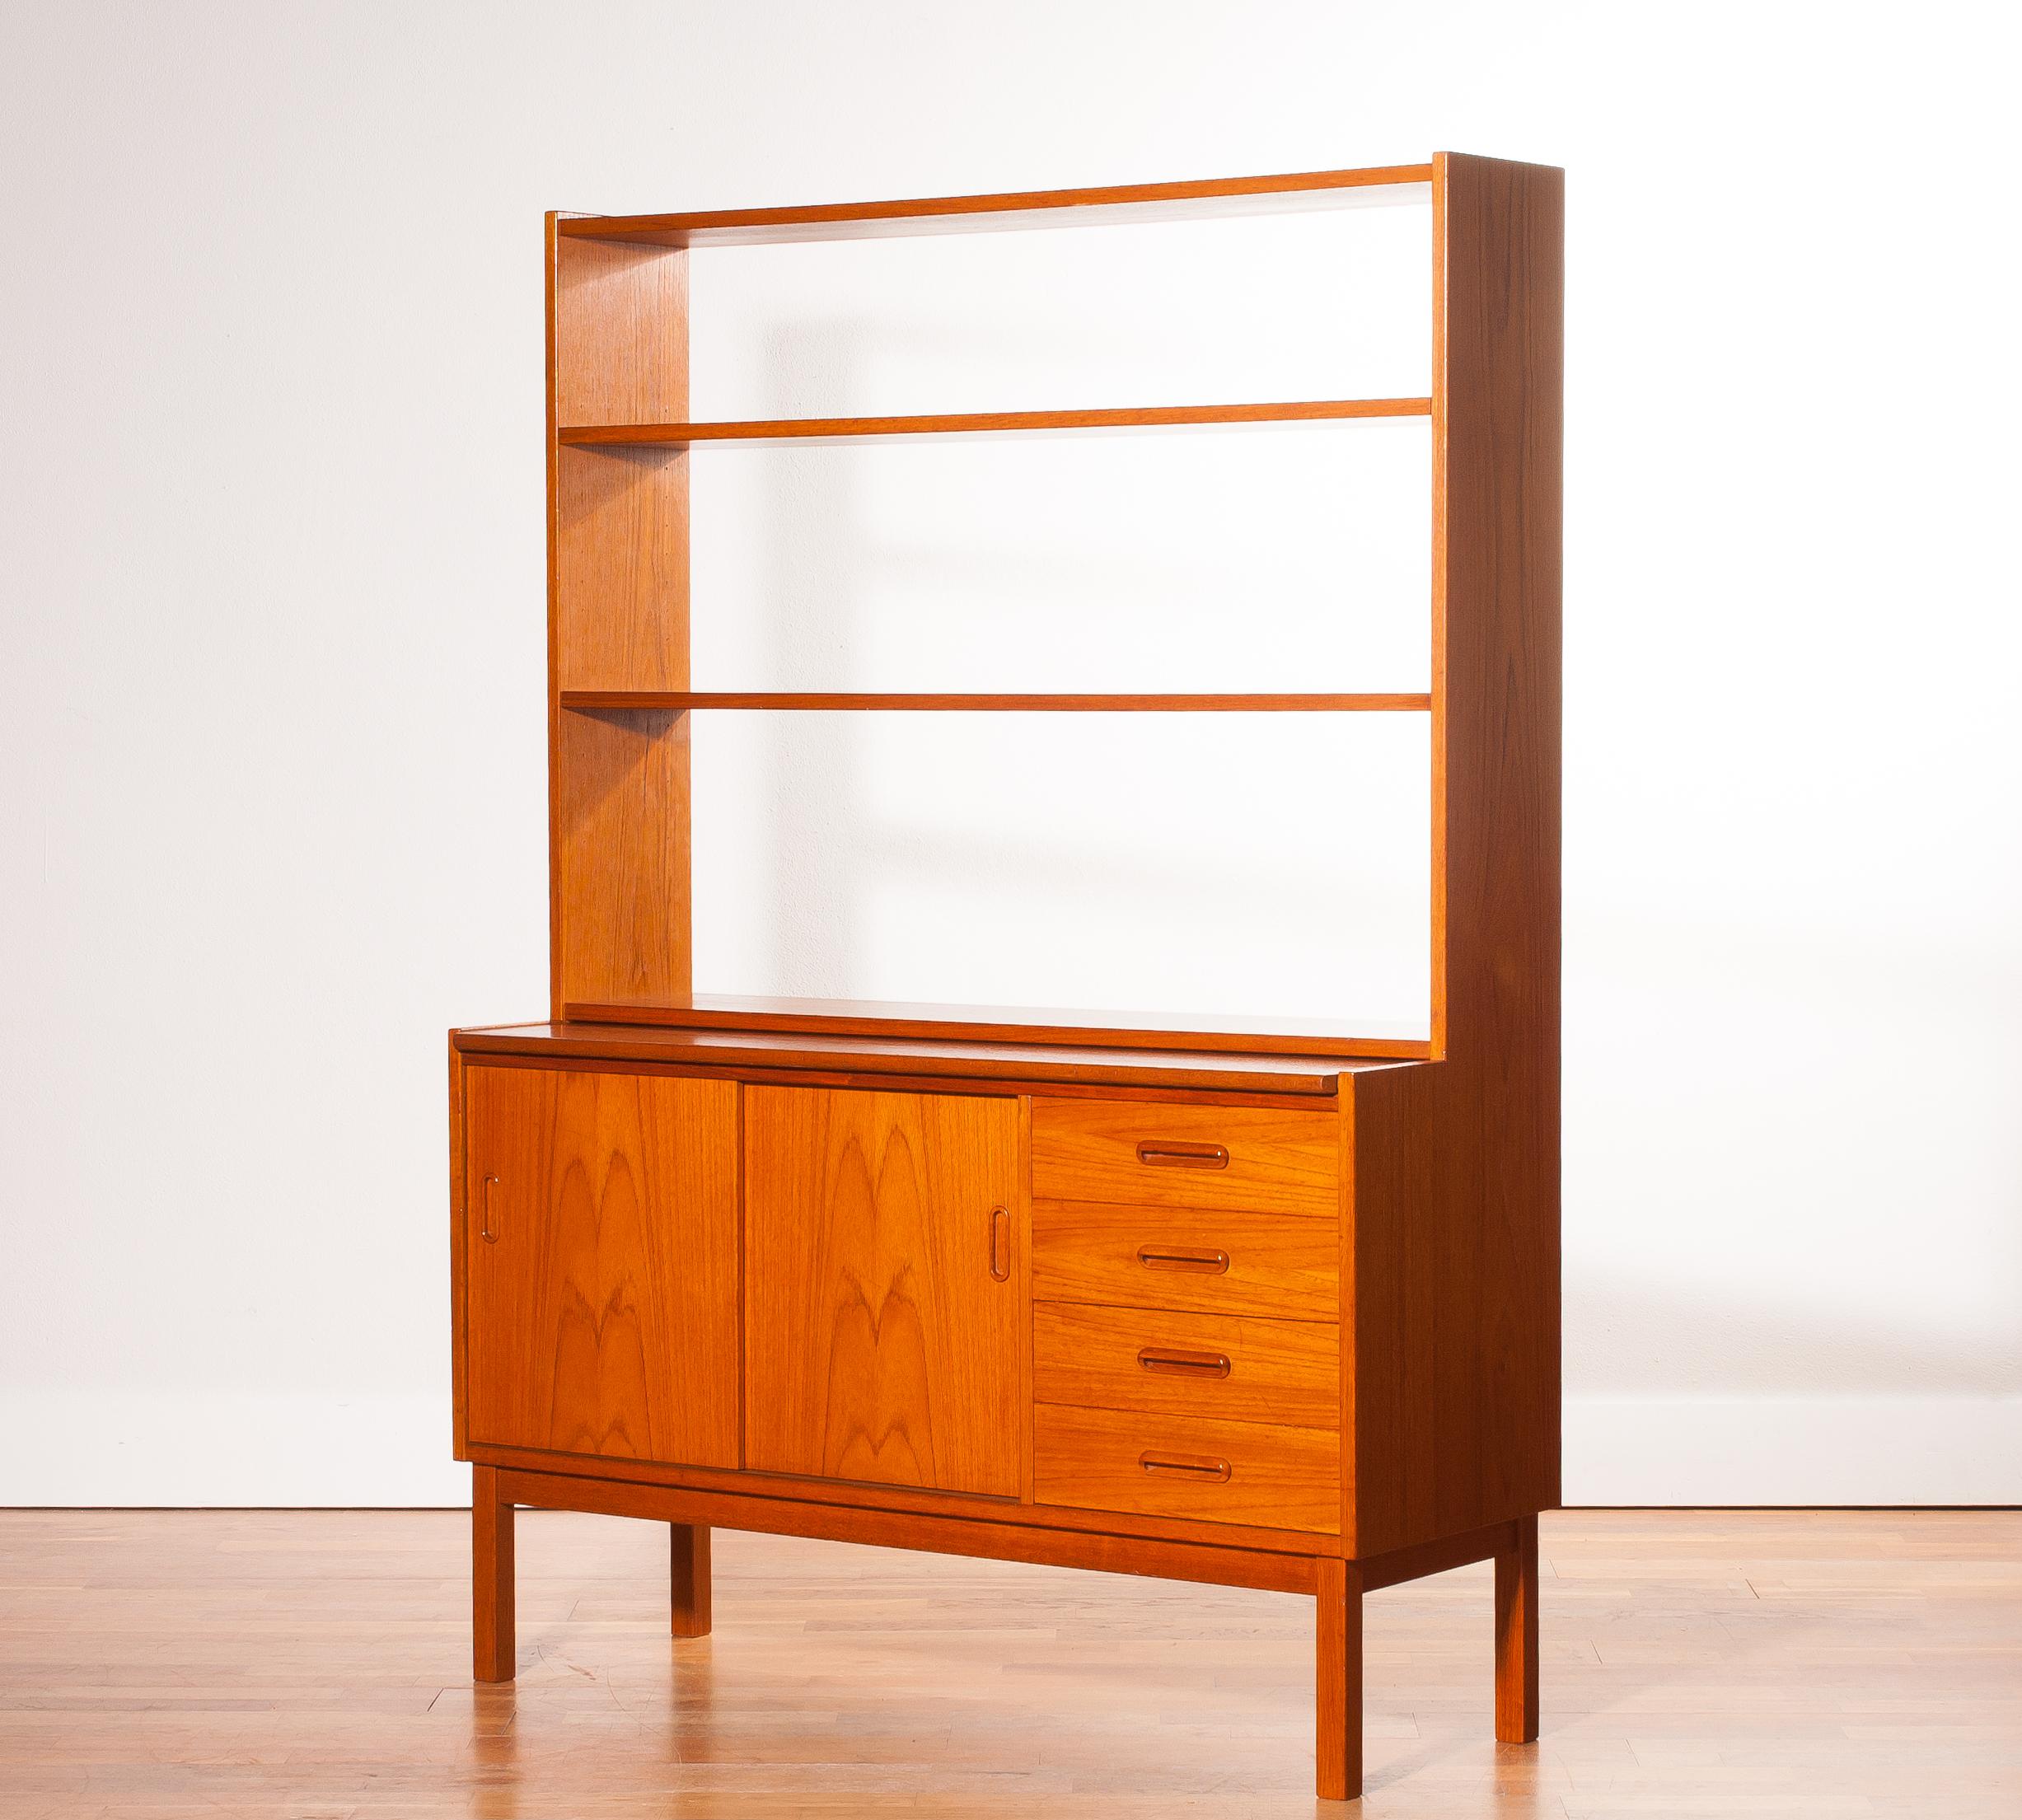 Swedish 1960s, Teak Book Case with Slidable Writing or Working Space from Sweden